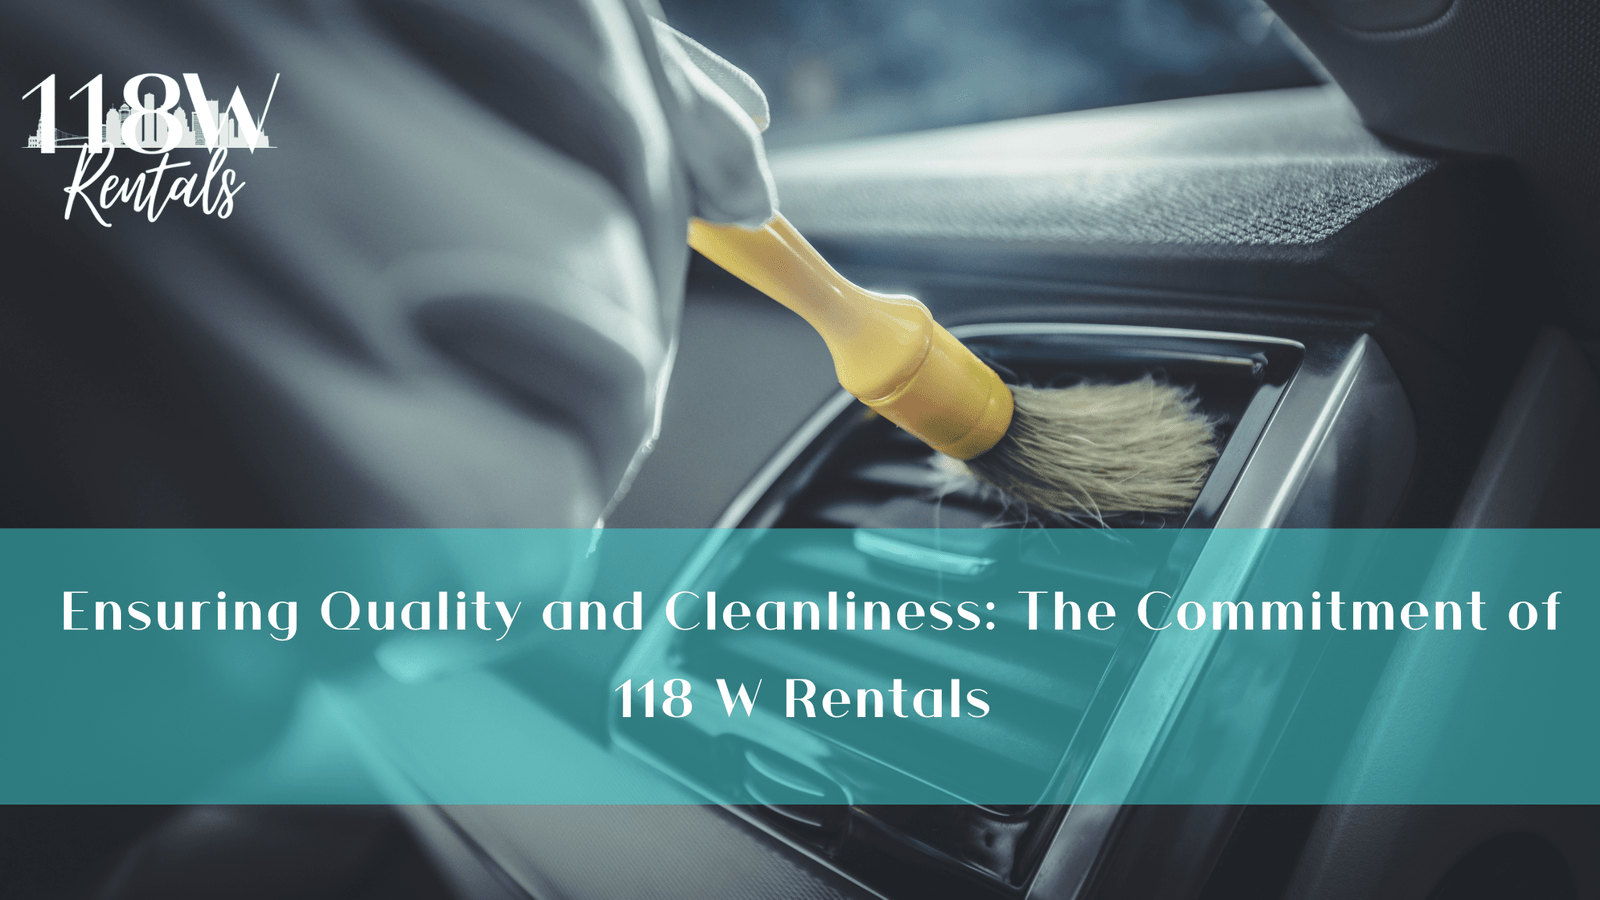 Ensuring Quality and Cleanliness: The Commitment of 118 W Rentals